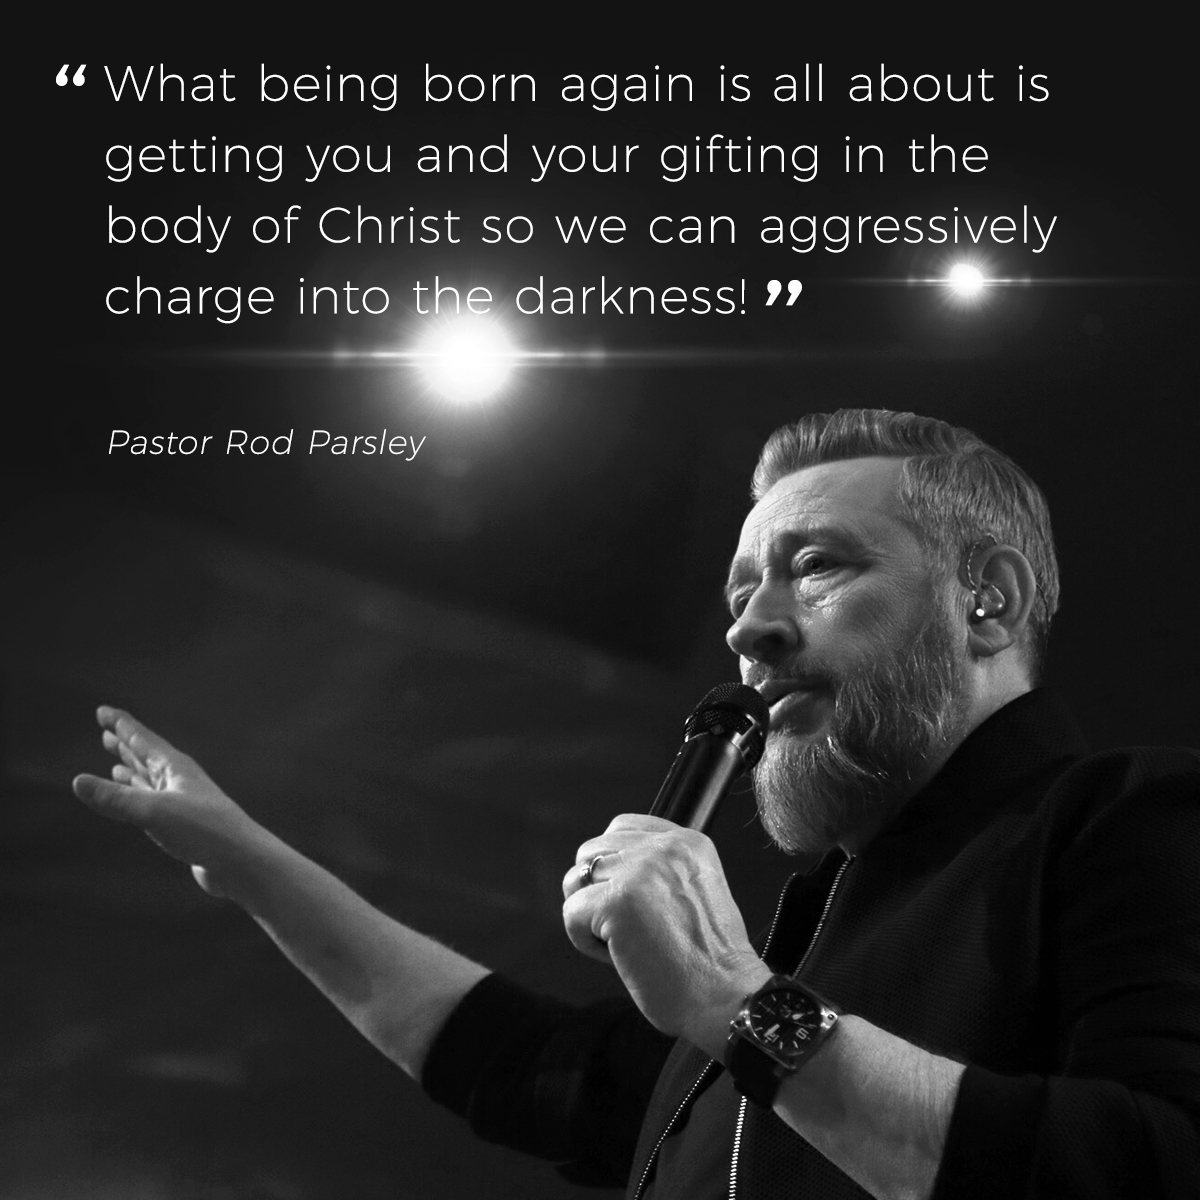 “What being born again is all about is getting you and your gifting in the body of Christ so we can aggressively charge into the darkness!” – Pastor Rod Parsley